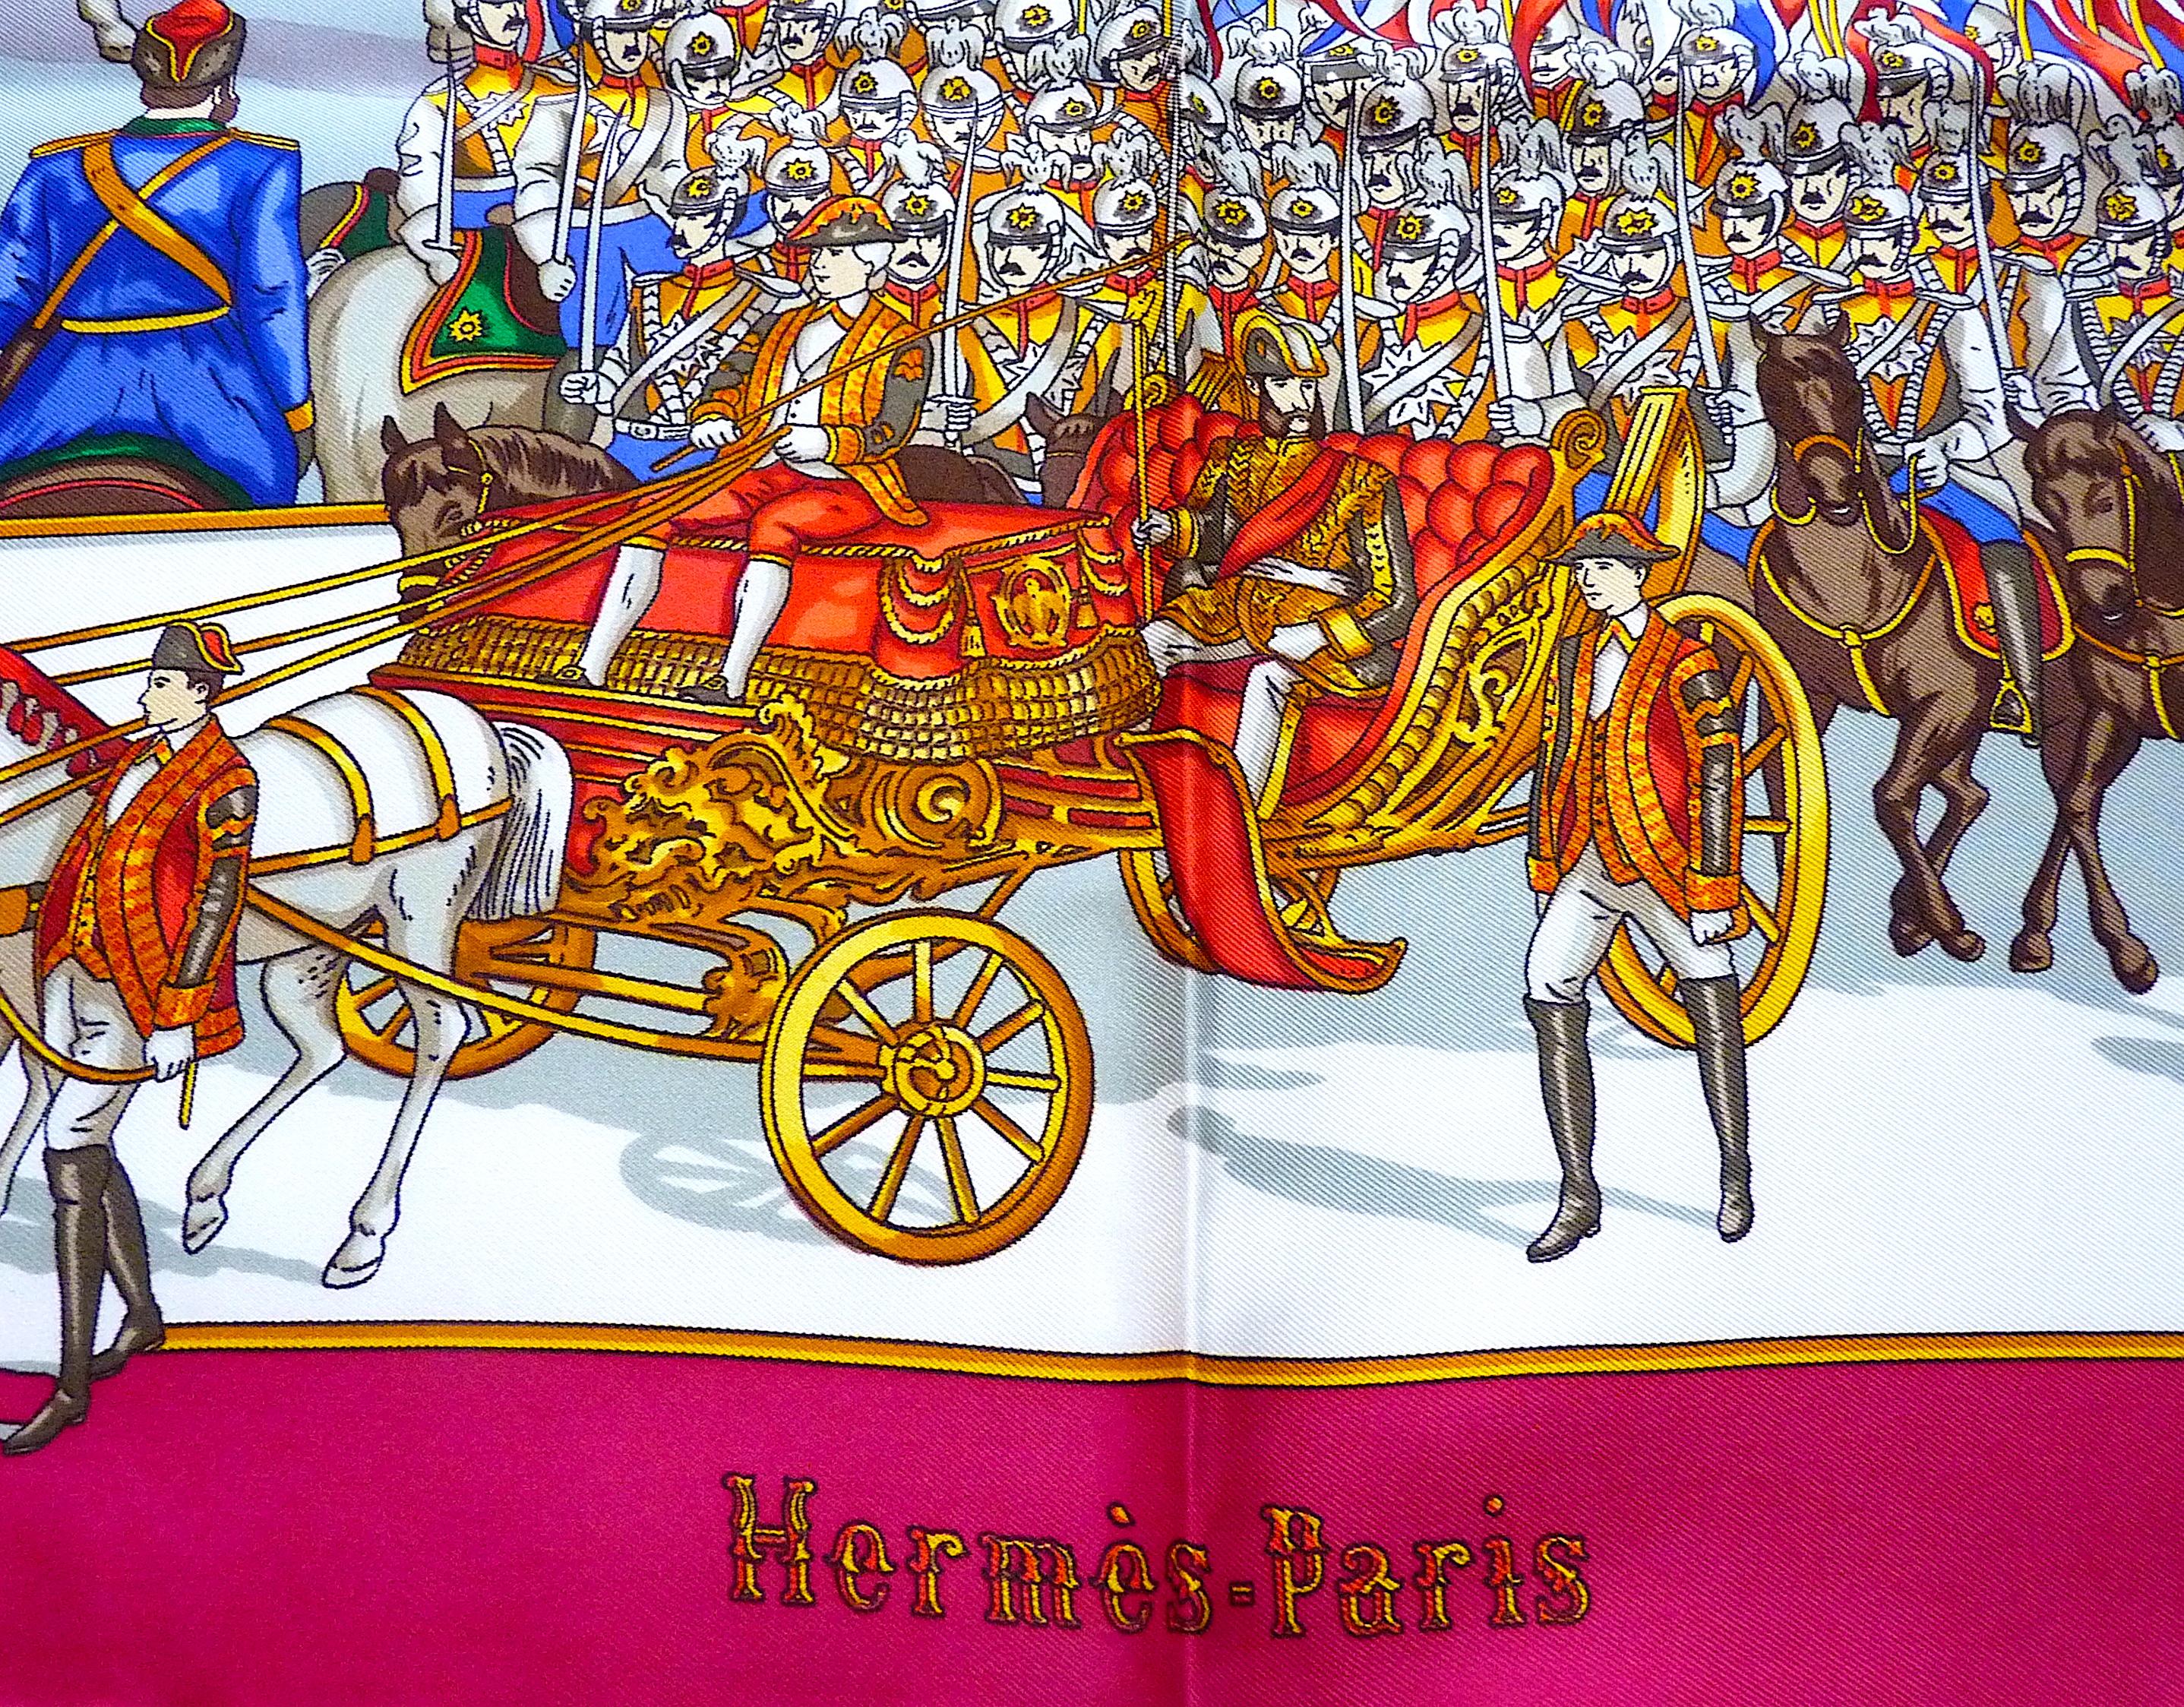 HERMES Silk Scarf Grand Cortège à Moscou by Michel Duchêne edited in 1992, Pristine Condition.
This stunning Hermes silk scarf is a grail for many Hermes collectors : it is a historical theme, depicting Tsar Alexander III's grand entrance to Moscow